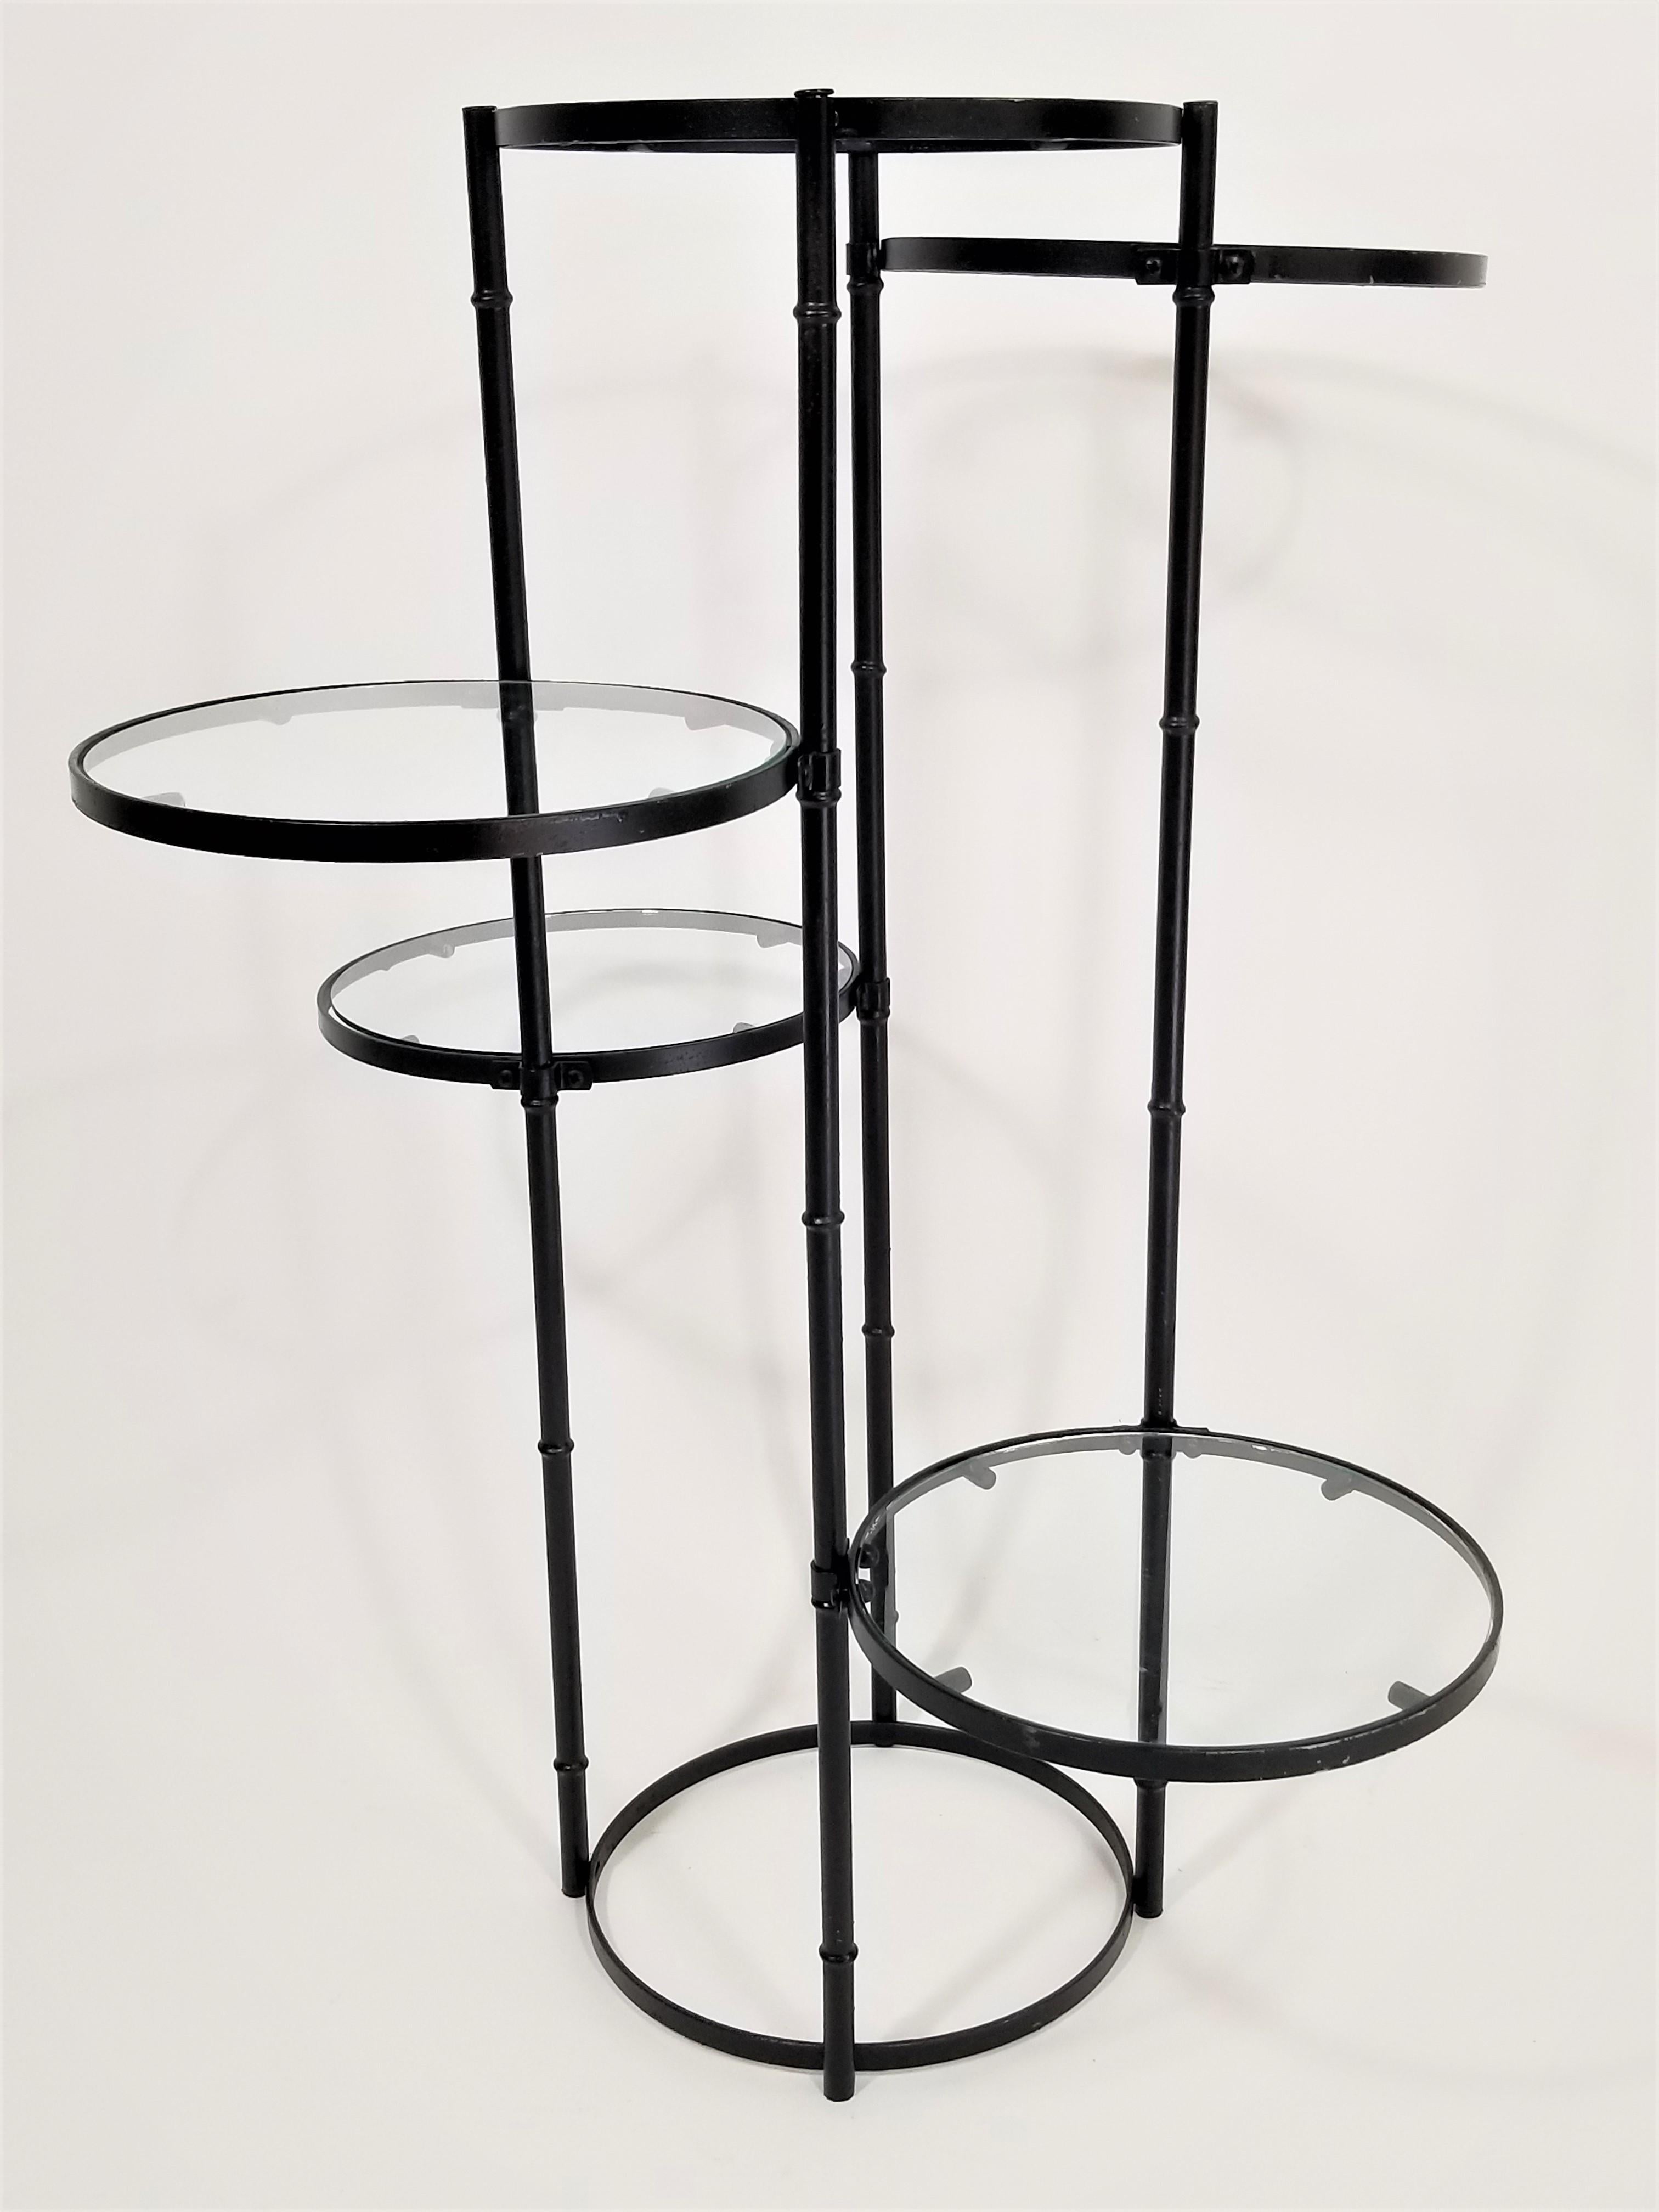 20th Century Art Deco Black Wrought Iron and Glass 5-Tiered Garden Patio Stand Midcentury